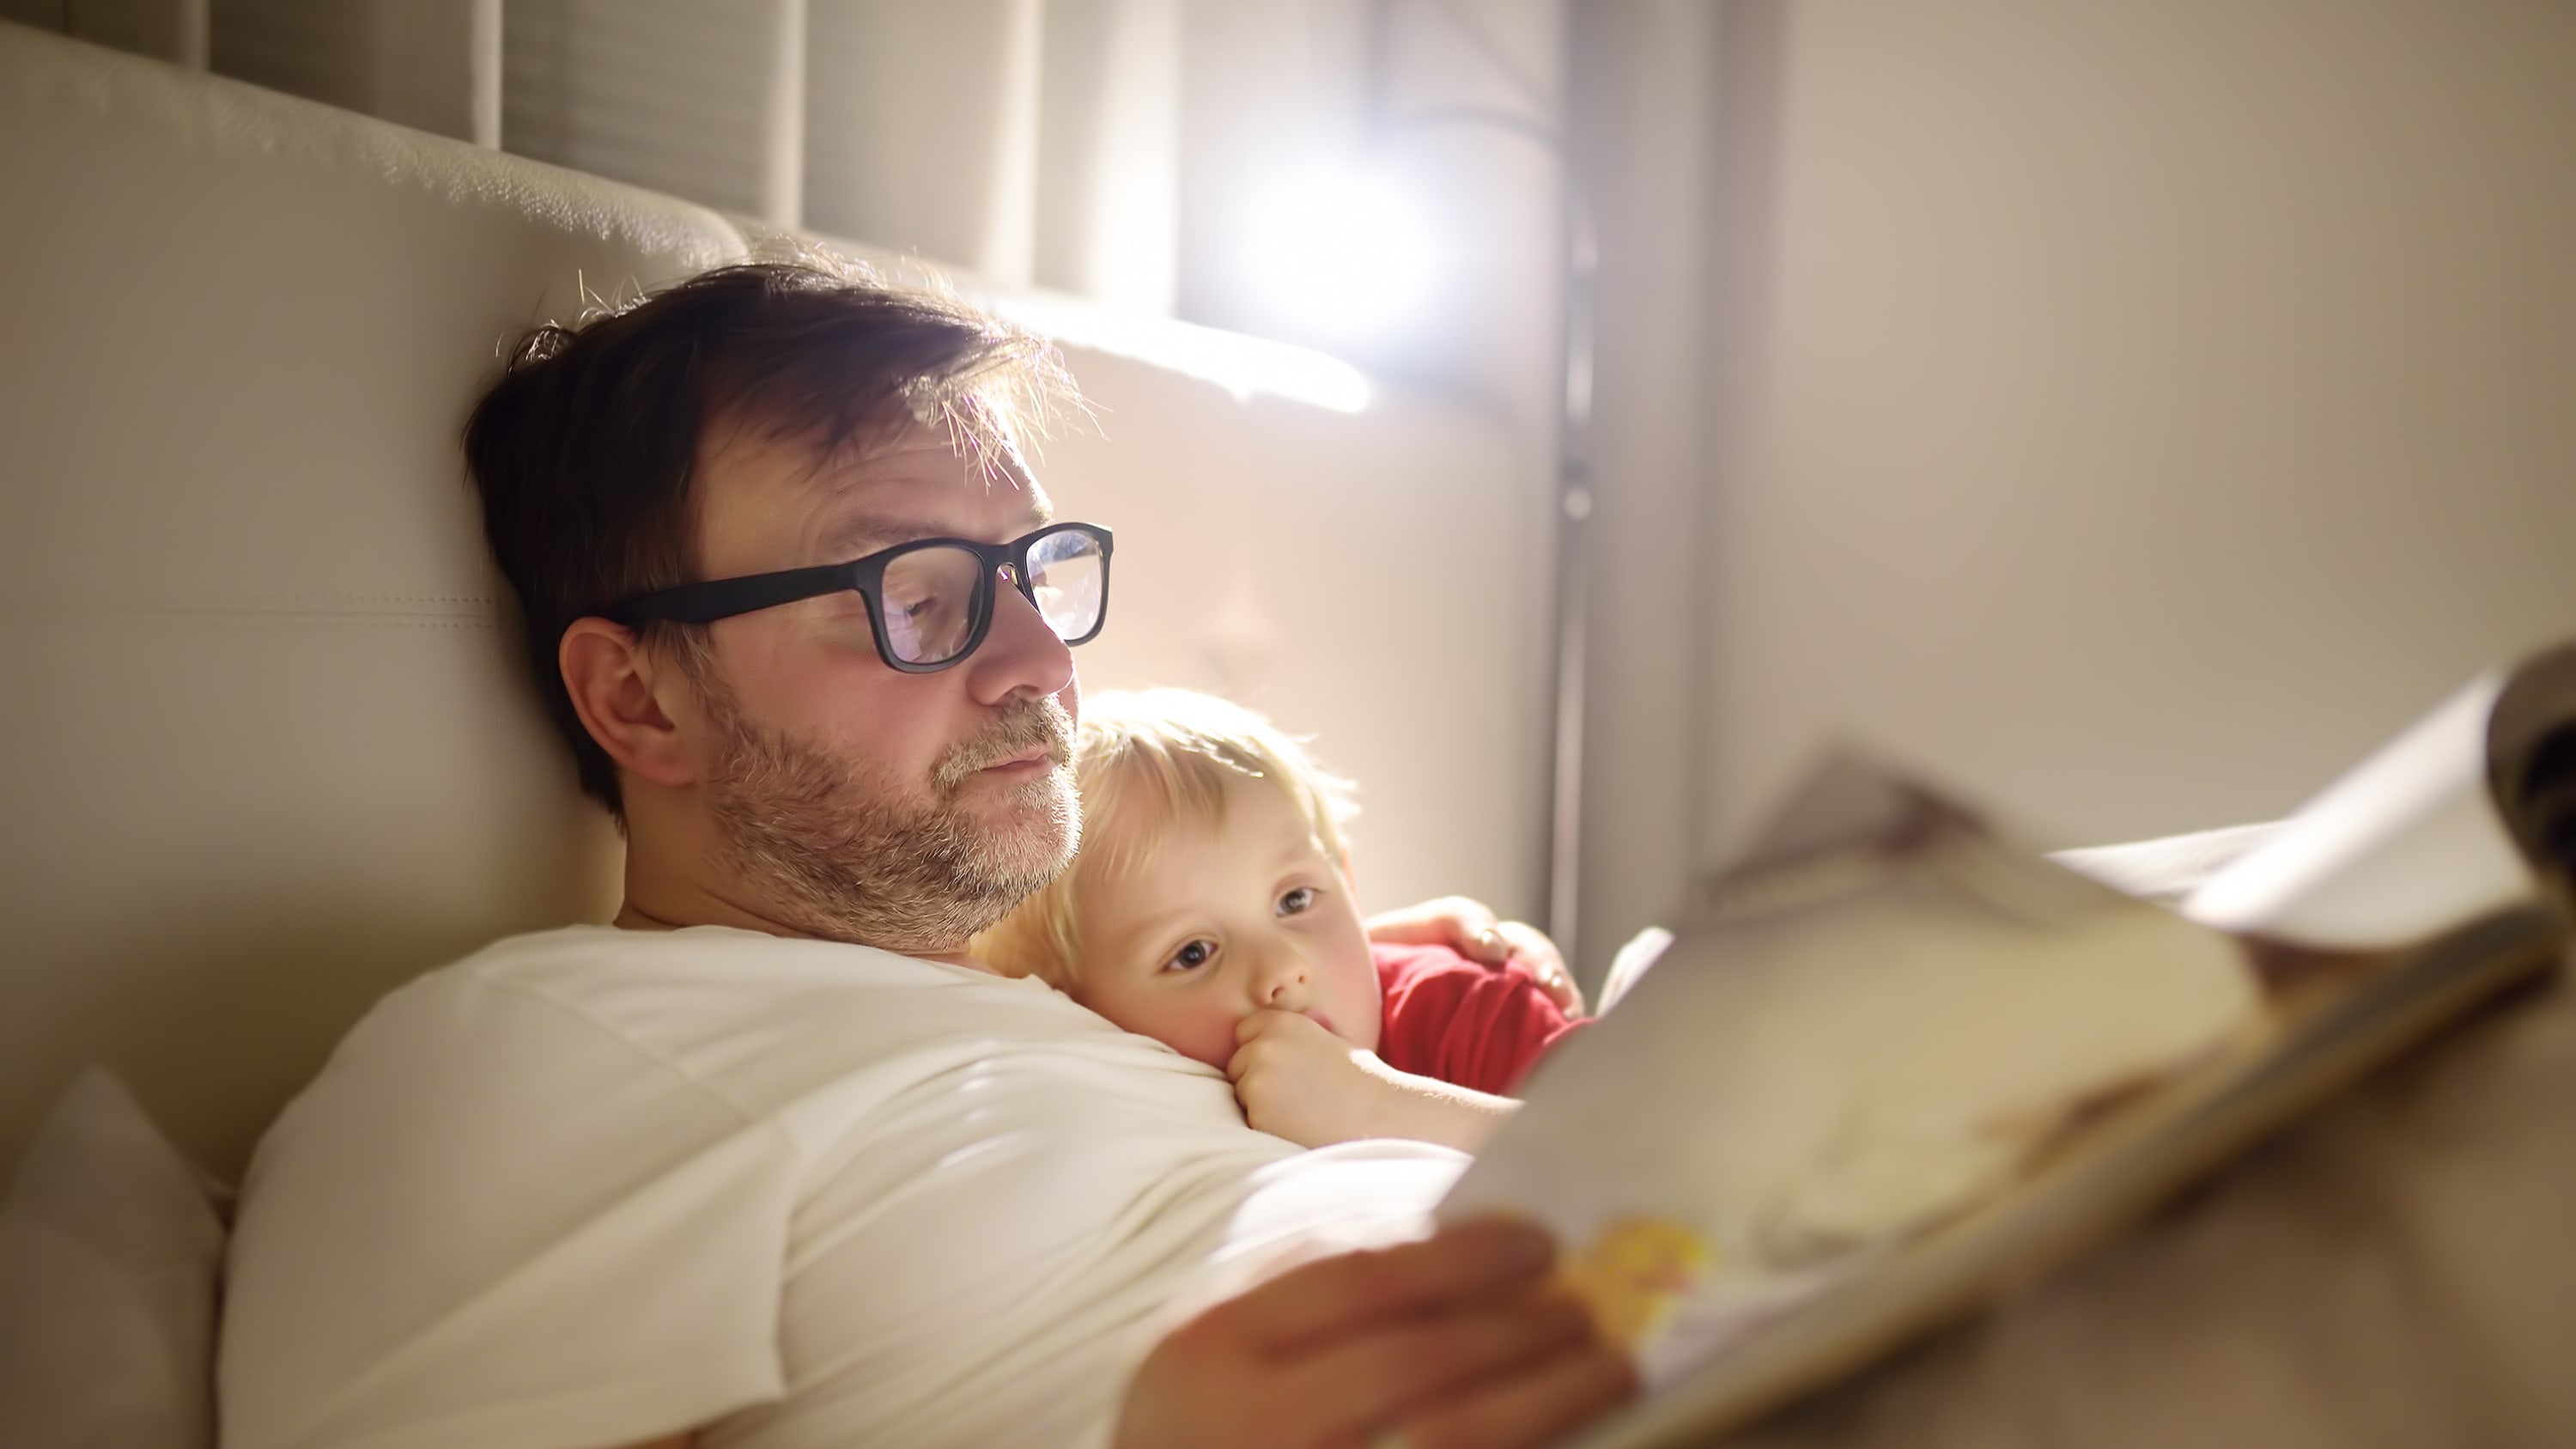 man reading with his child, unaware of his potential risk for HPV-associated oropharyngeal cancer